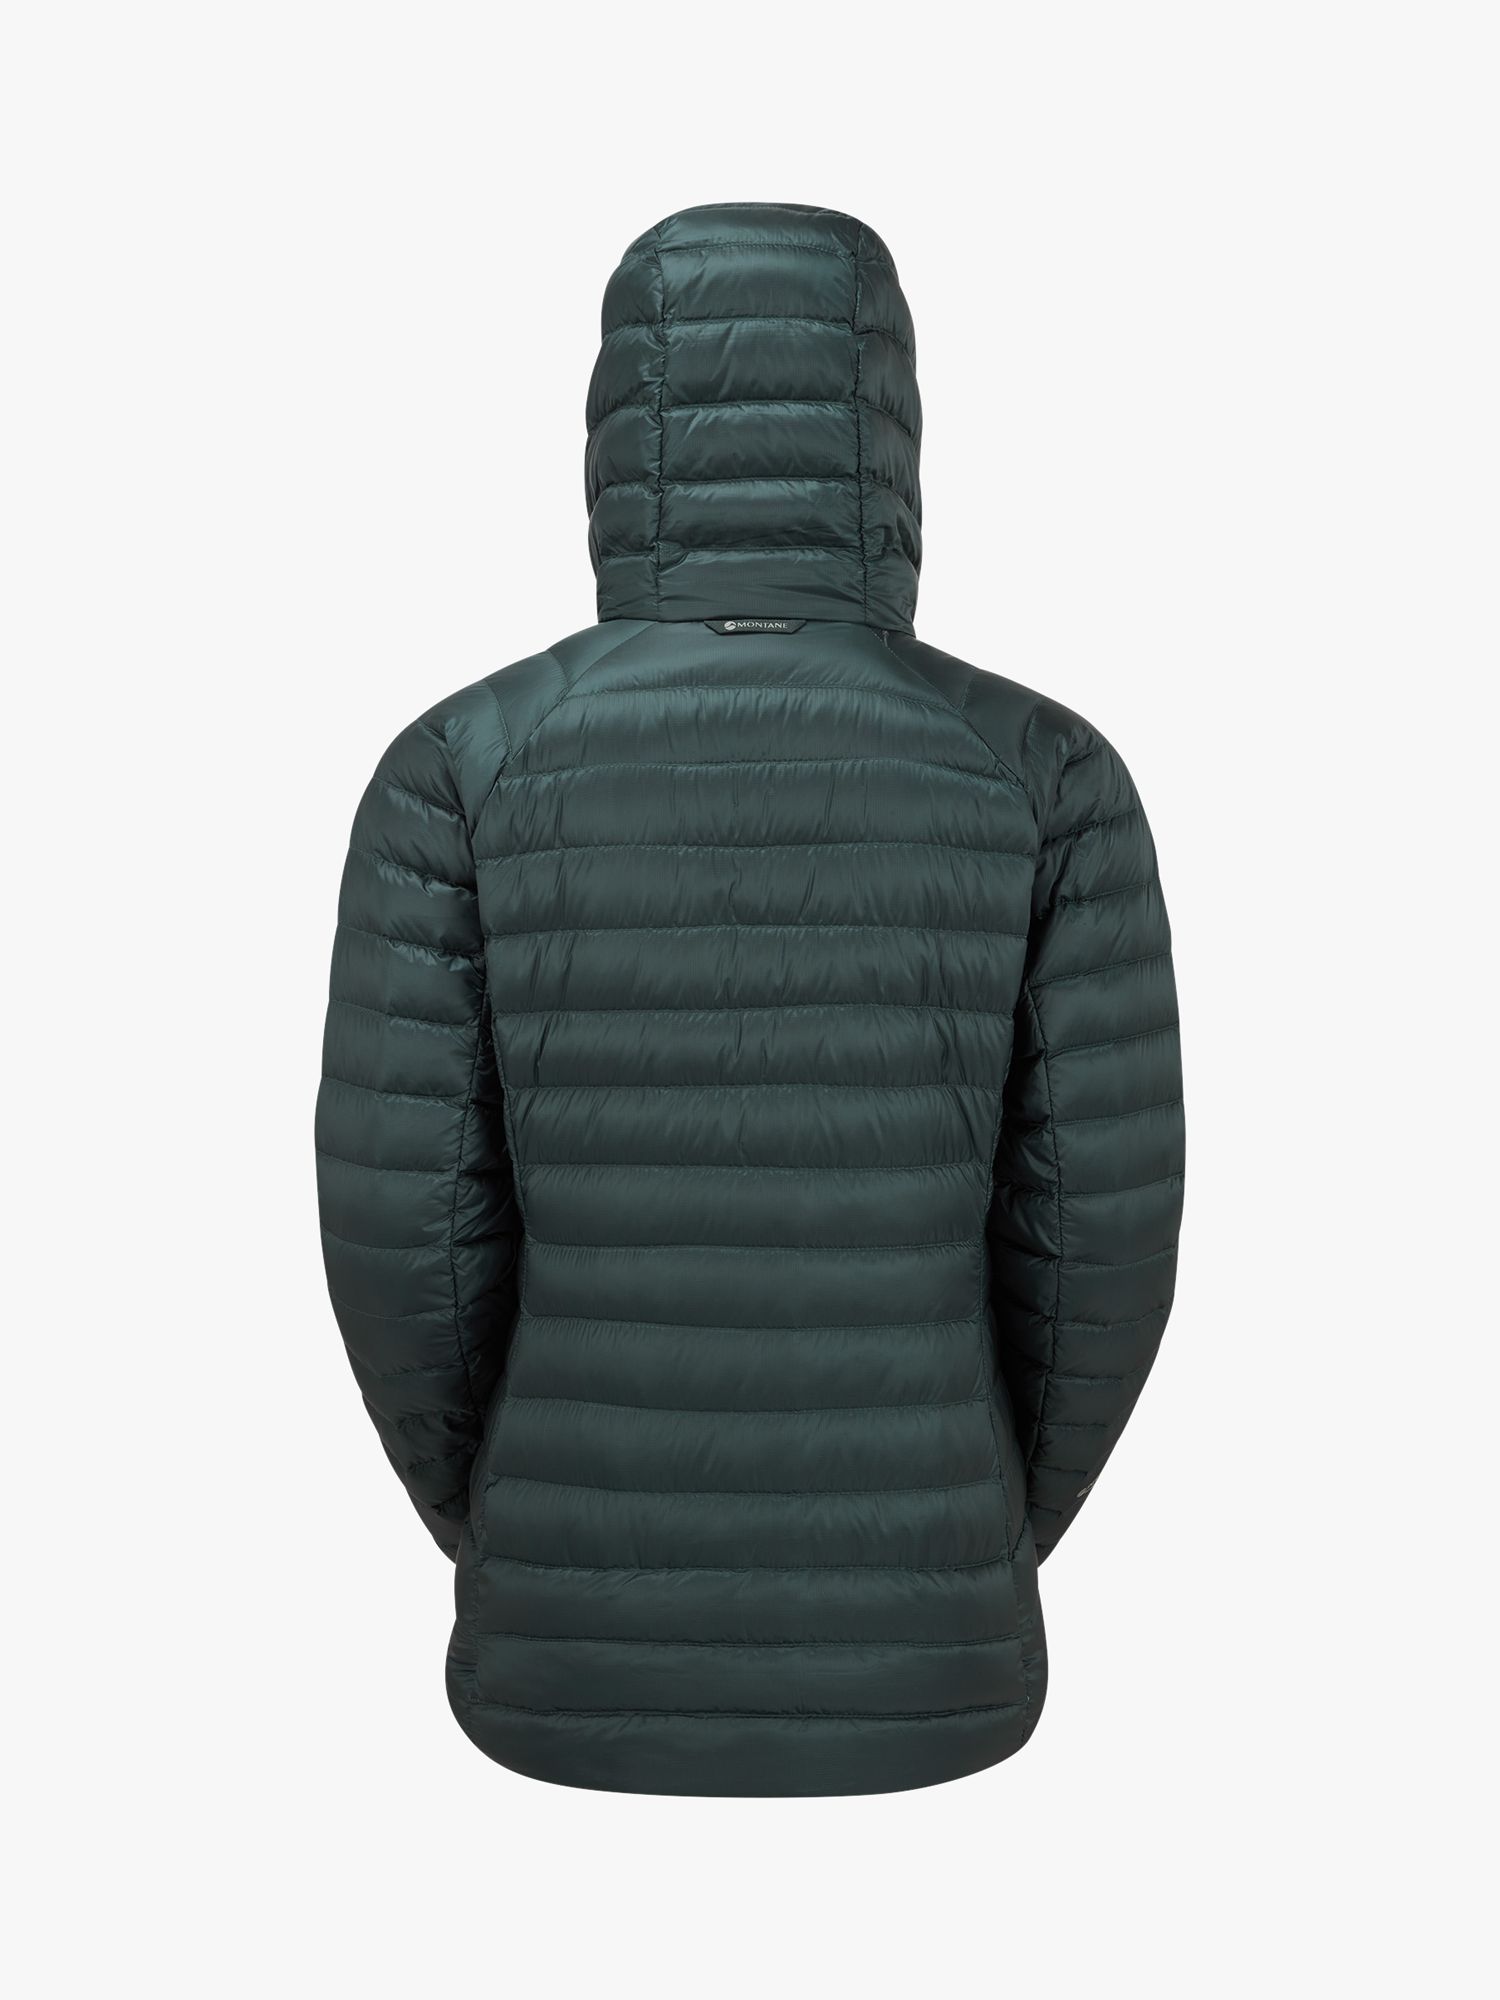 Buy Montane Anti-Freeze Women's Recycled Packable Down Jacket Online at johnlewis.com